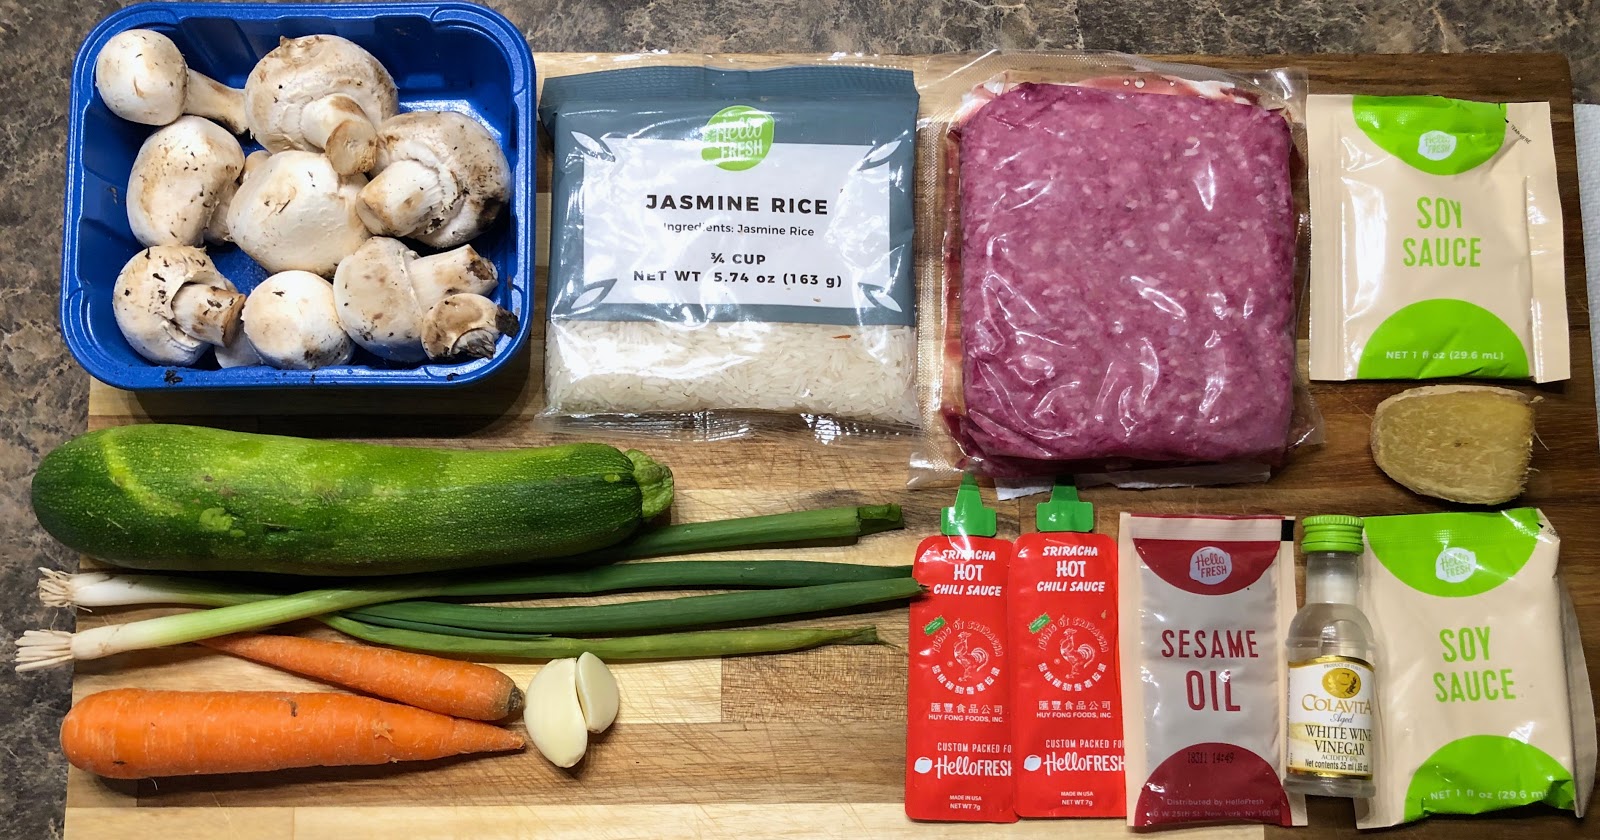 30th Hello Fresh Review & $40 Coupon - Blue Skies for Me Please